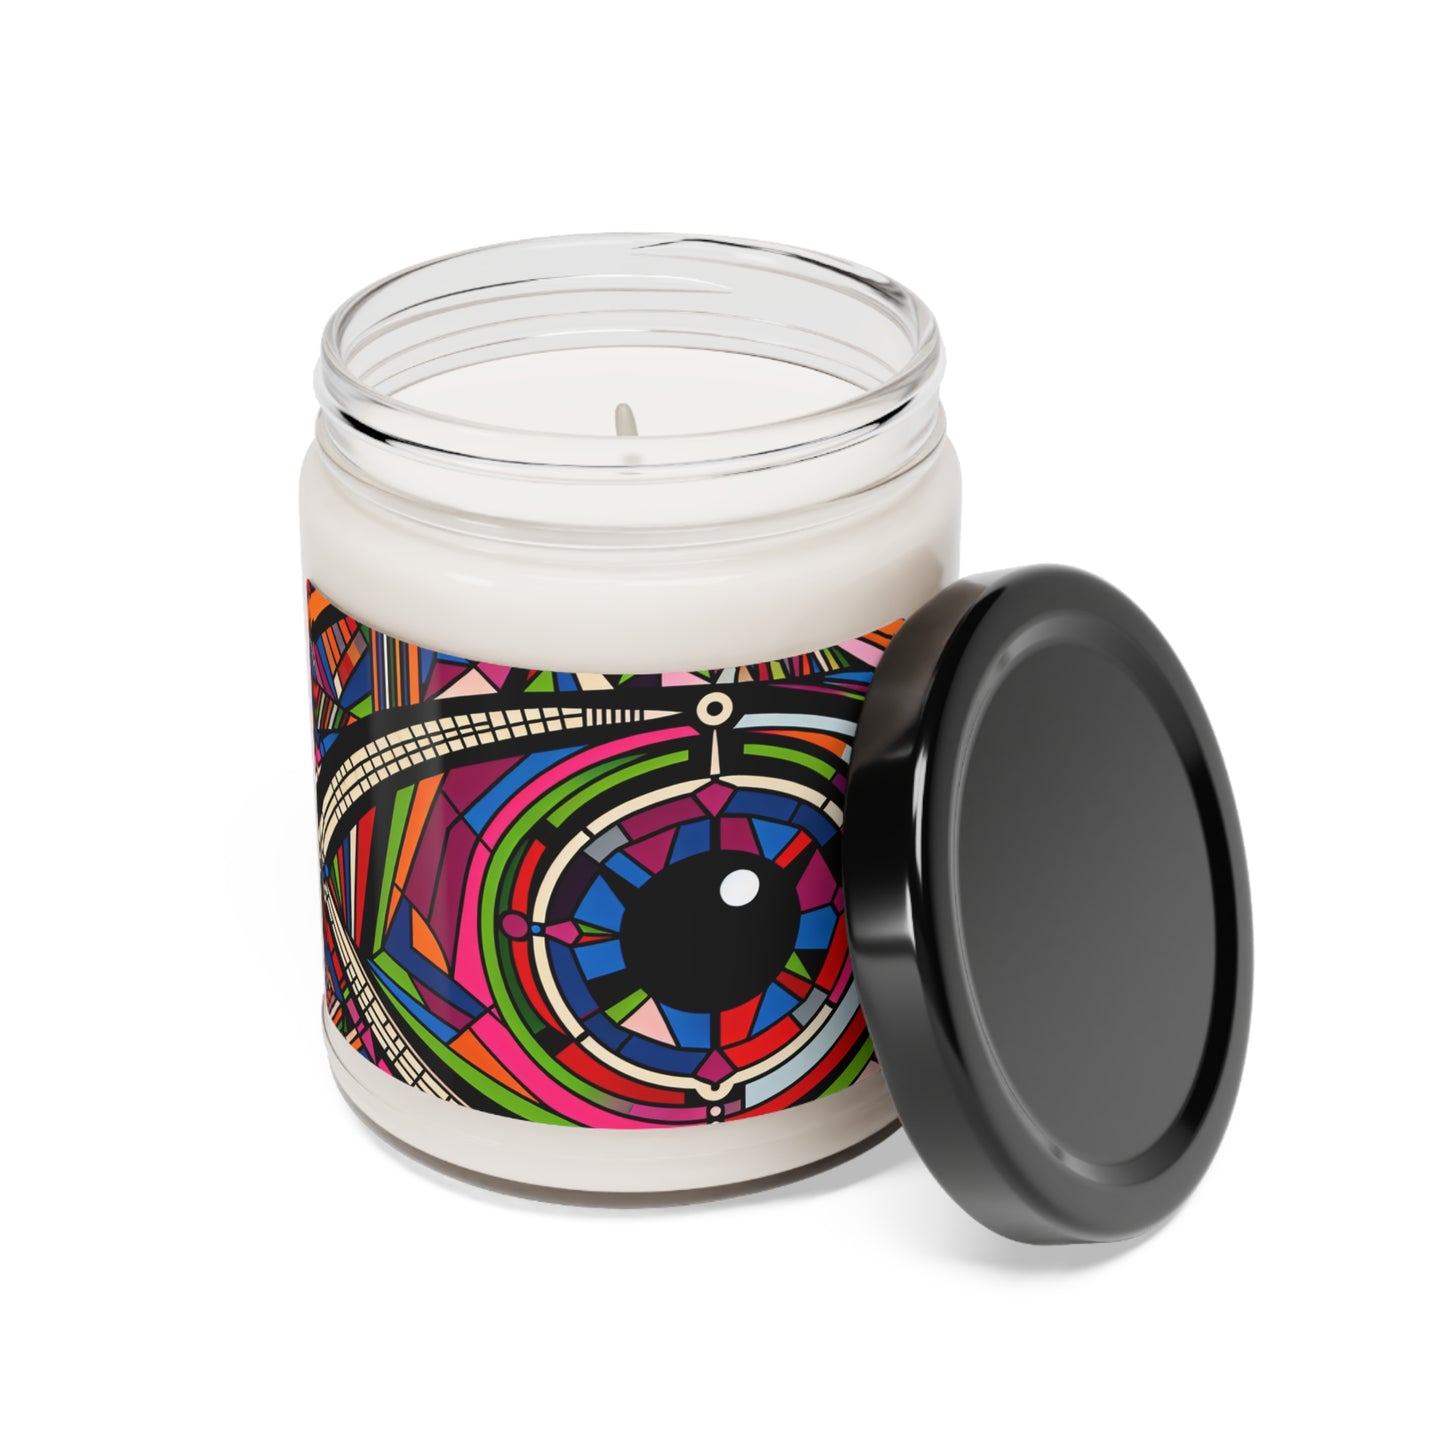 "Eye of the Illusionist". - The Alien Scented Soy Candle 9oz Op Art Style